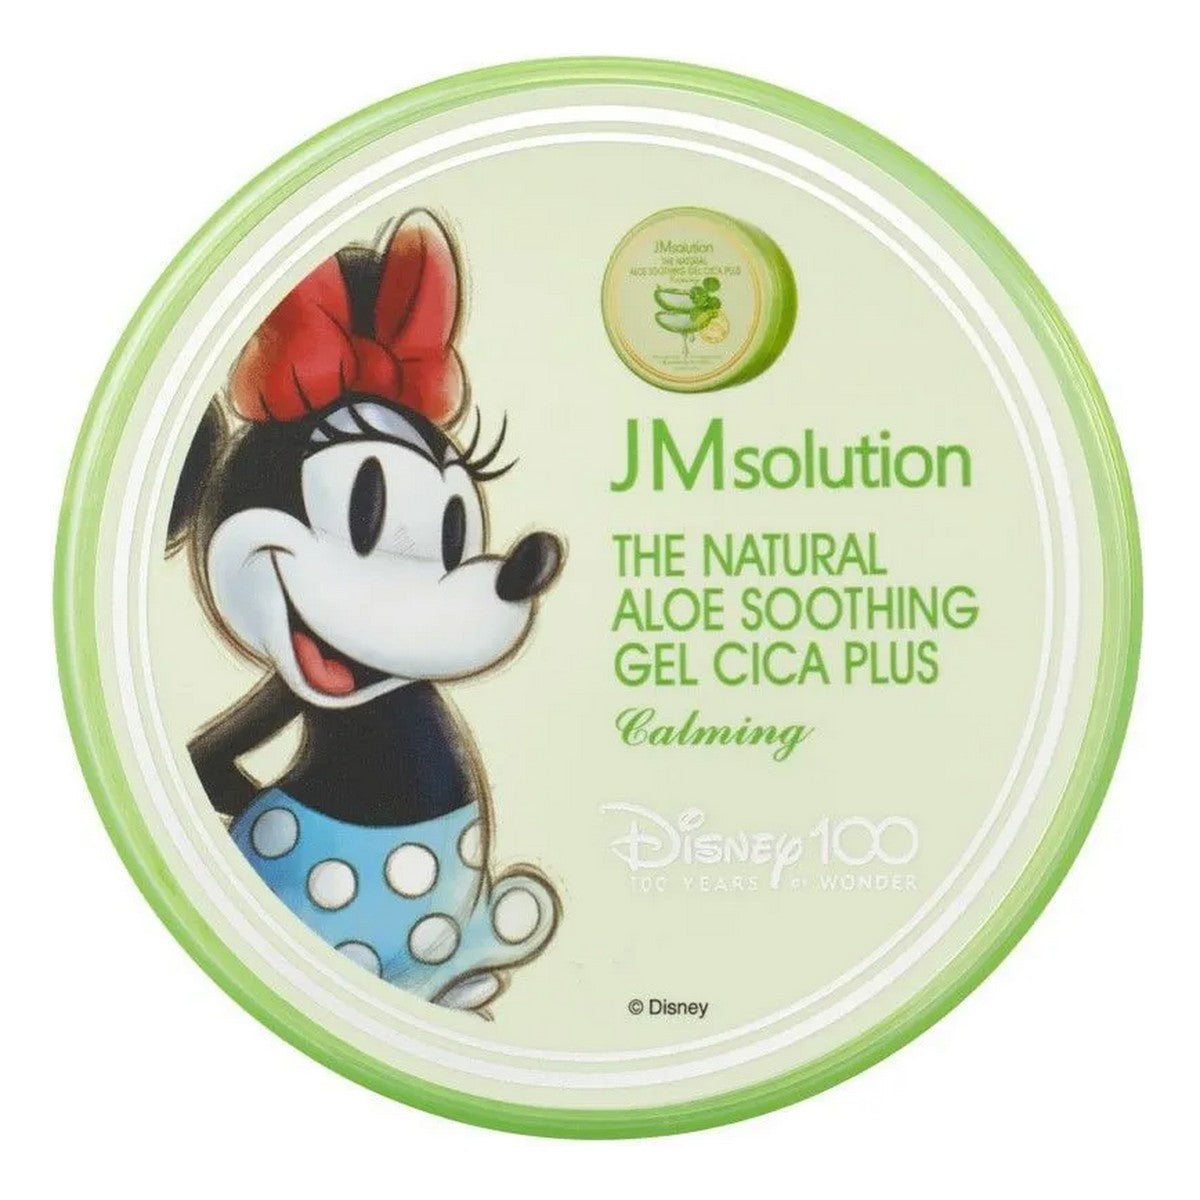 JMSOLUTION - The Natural Aloe Soothing Gel Cica Plus Calming